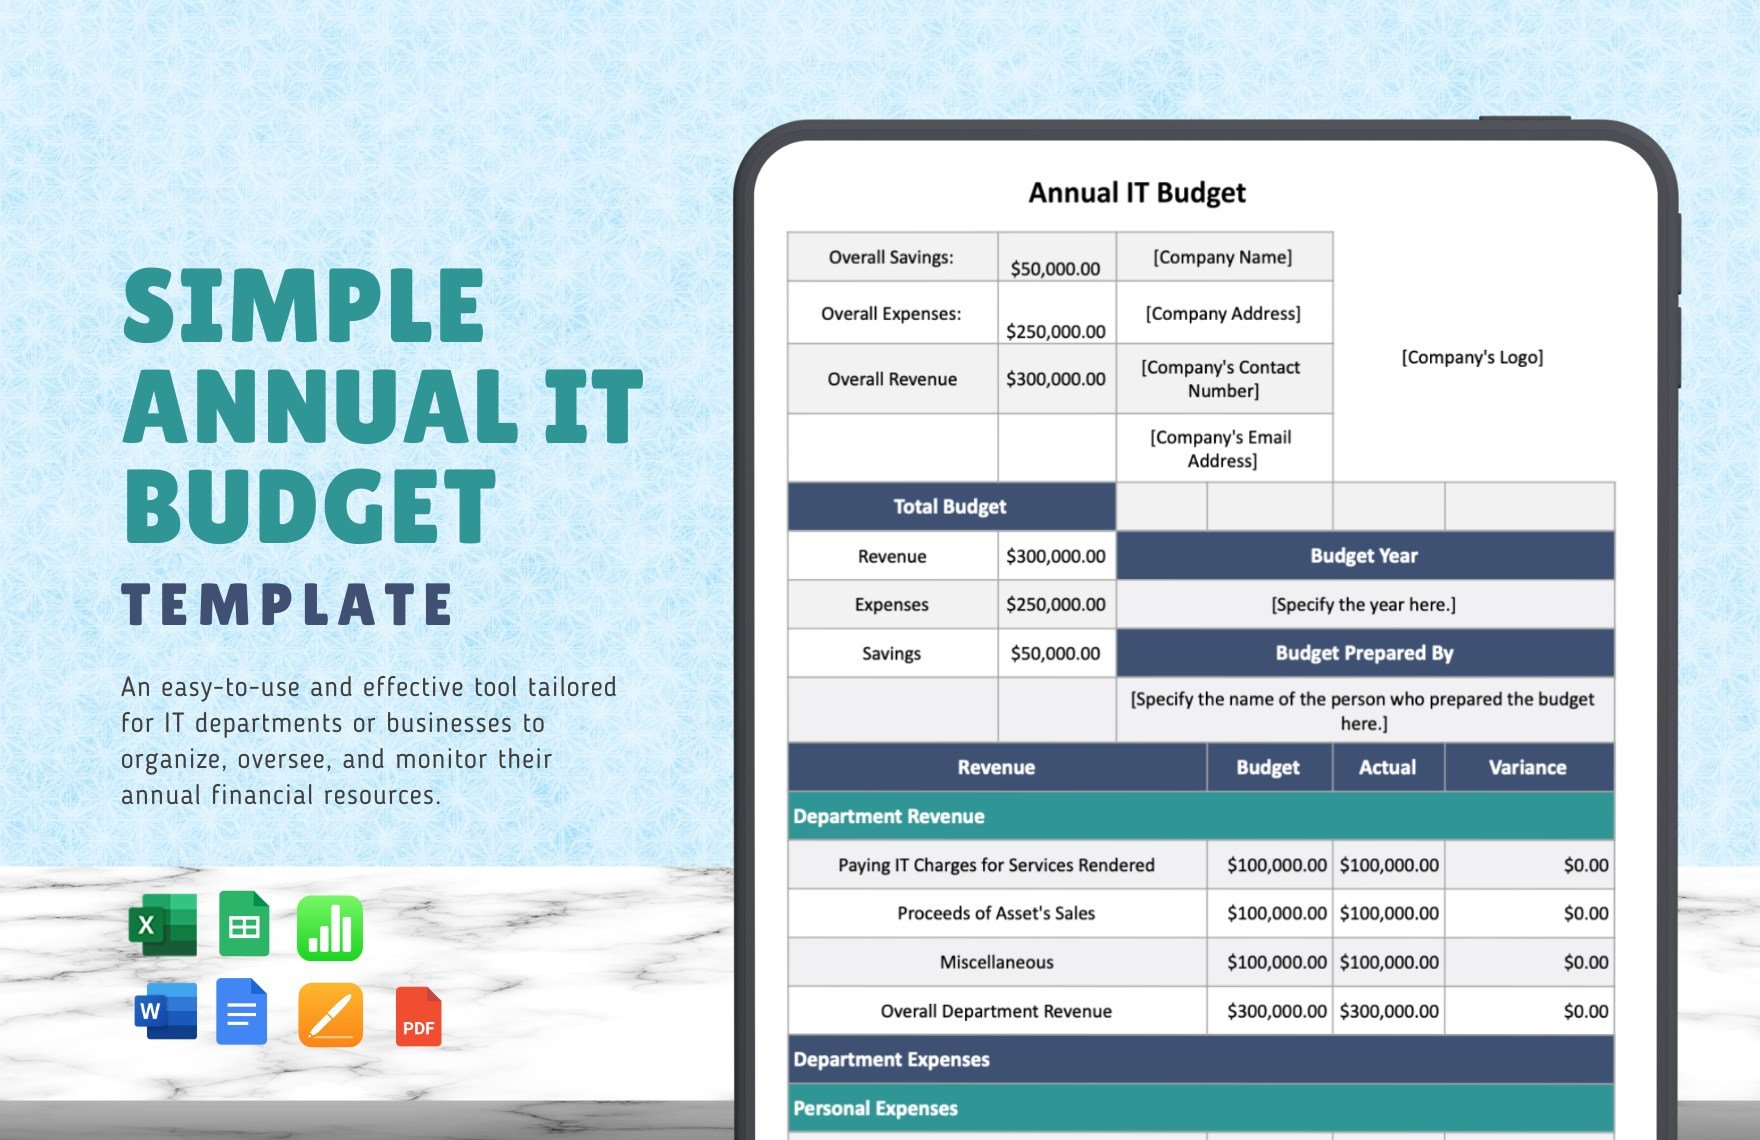 Simple Annual IT Budget Template